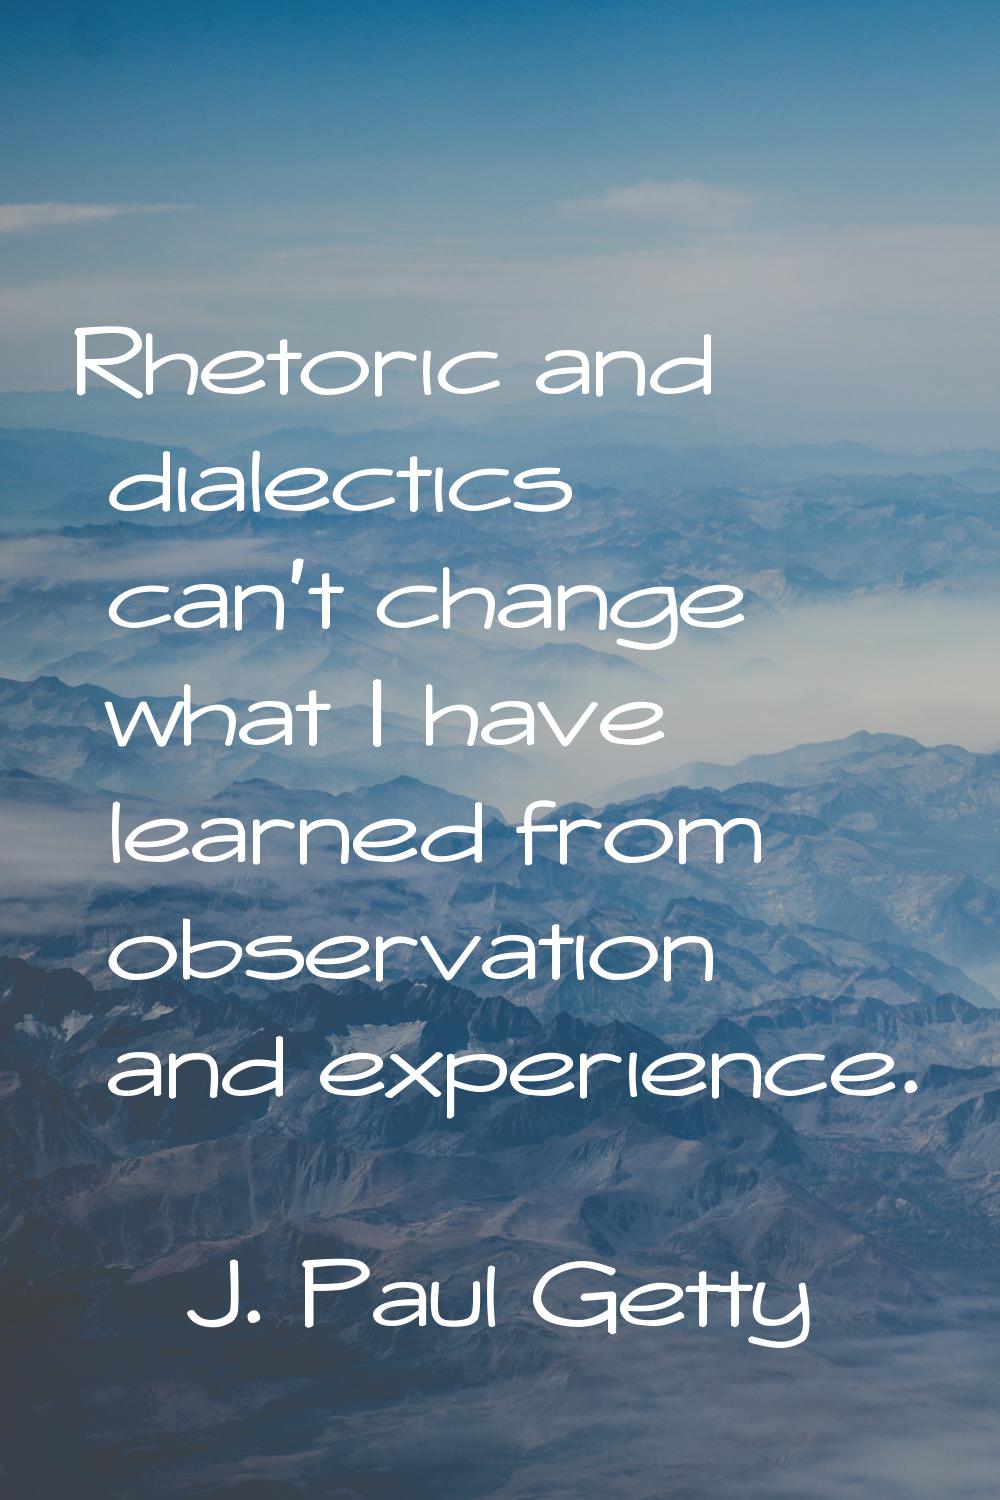 Rhetoric and dialectics can't change what I have learned from observation and experience.